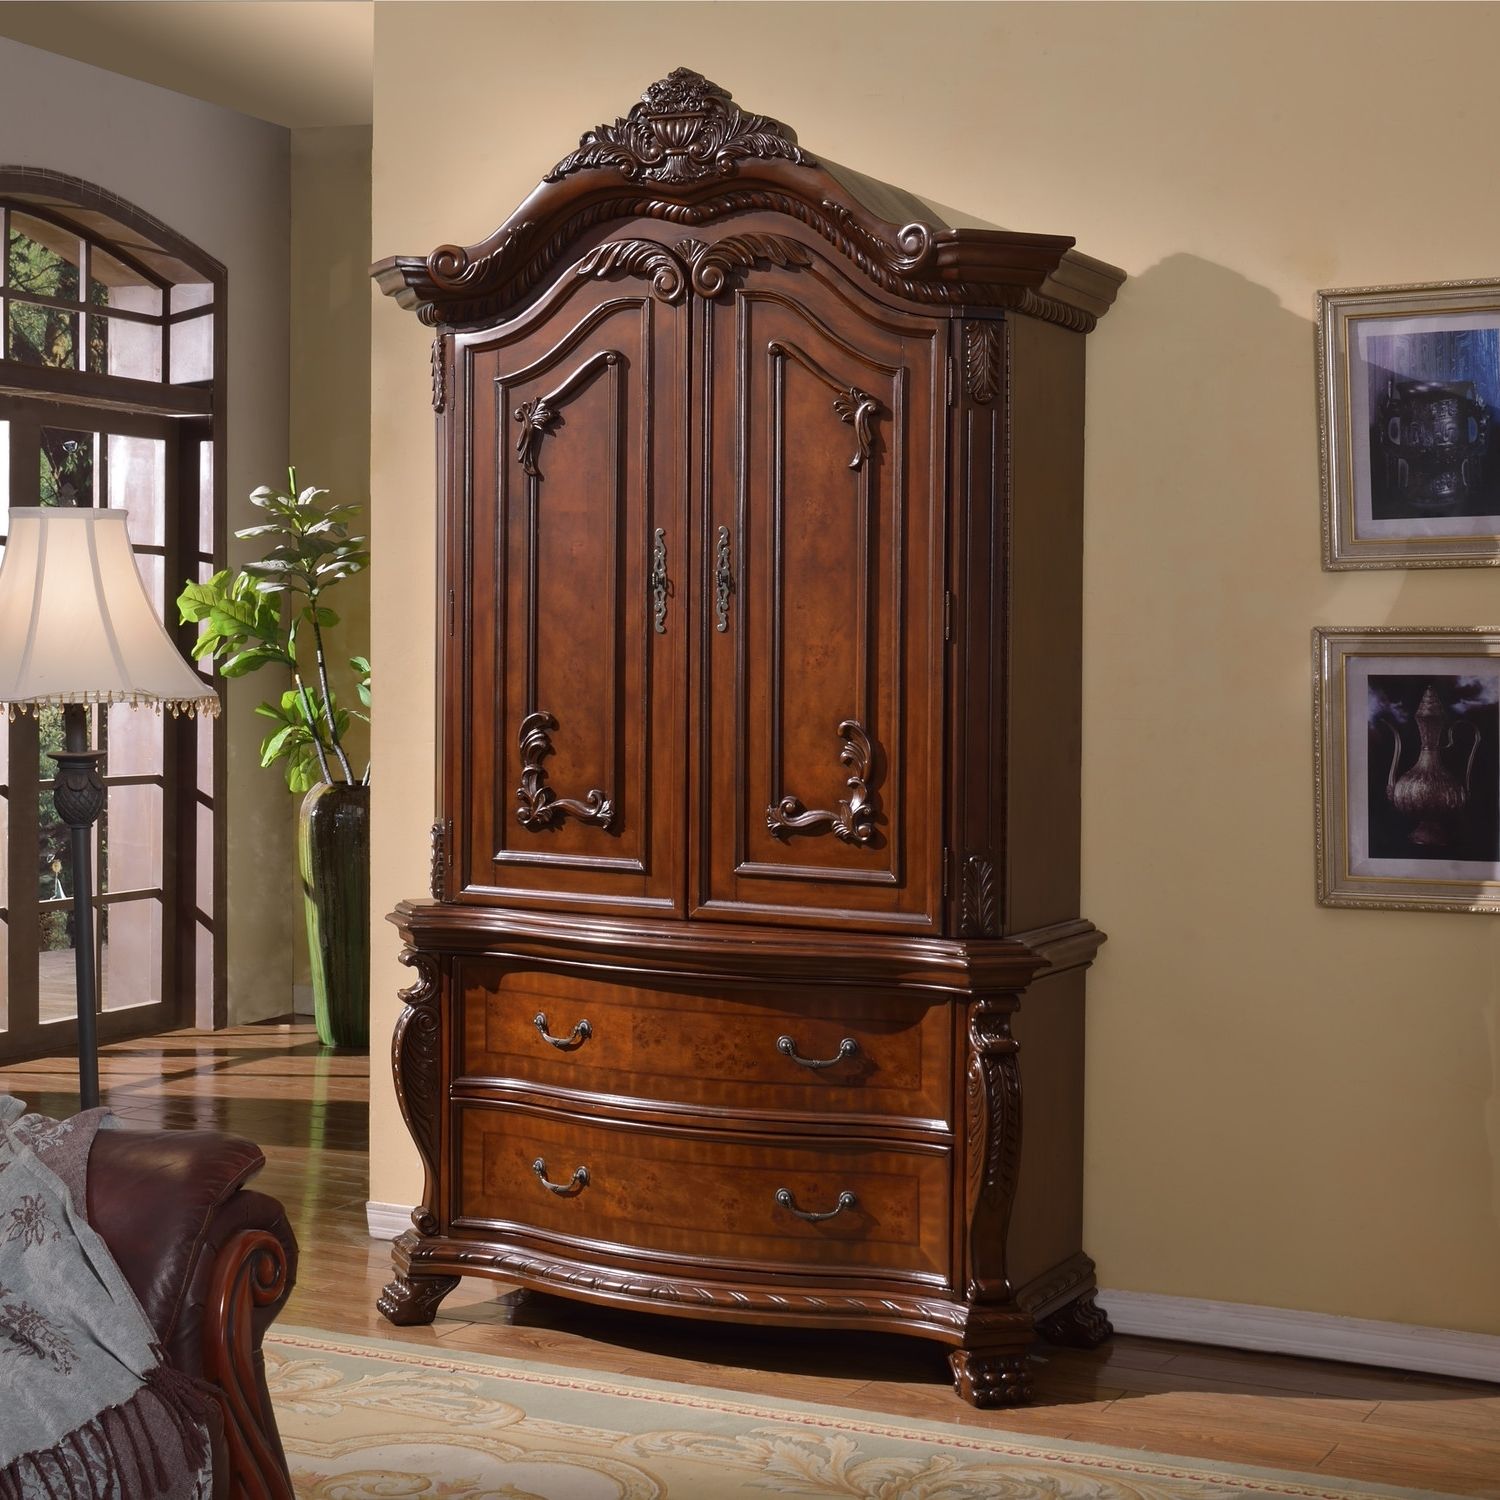 Favorite Dark Wood Wardrobes With Drawers Pertaining To Bedroom: Cozy Dark Wood Flooring With White Wardrobe Armoire And (View 12 of 15)